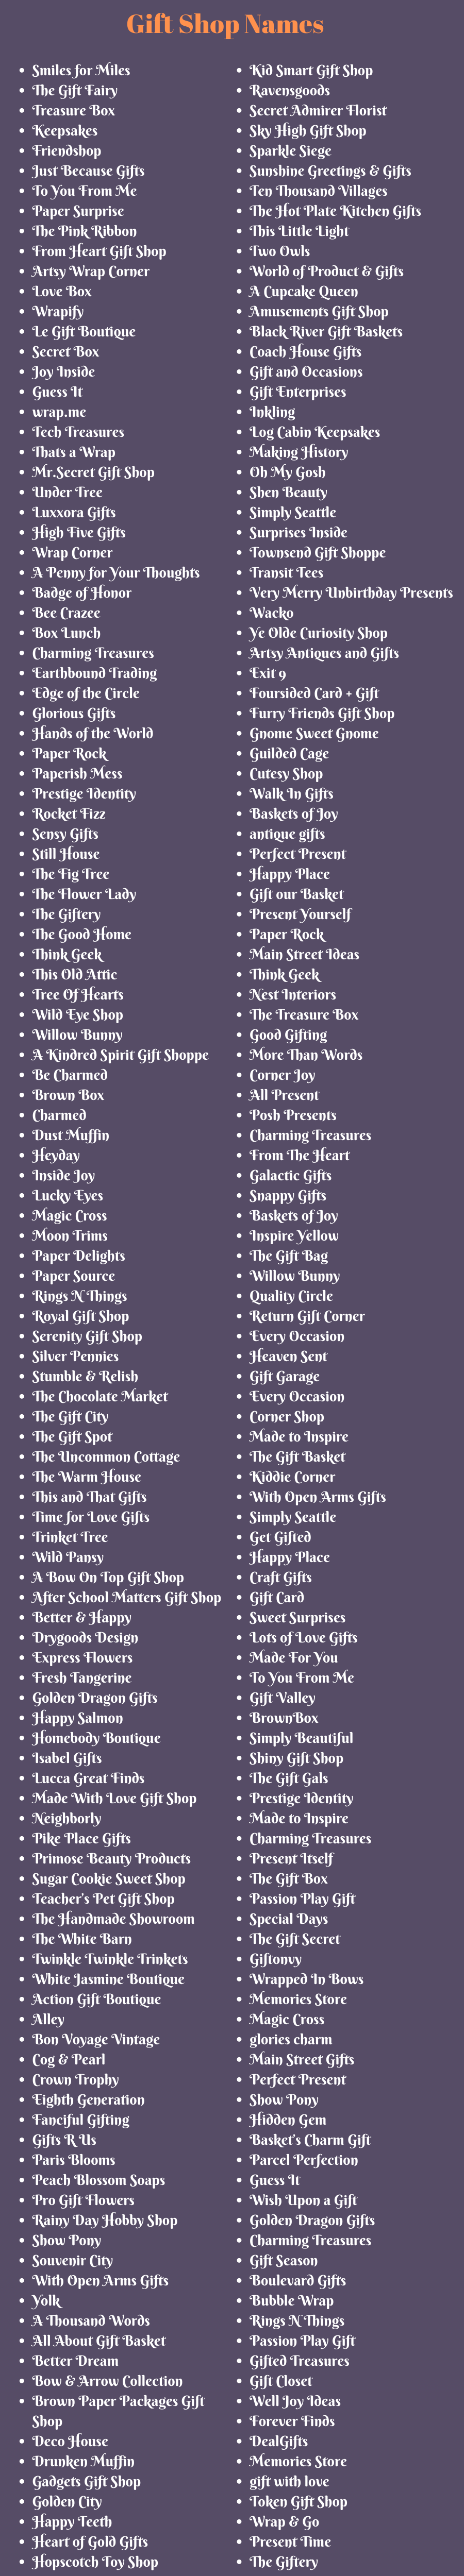 shore Offer principle Gift Shop Names: 400+ Names for Gift Shop & Wrapping